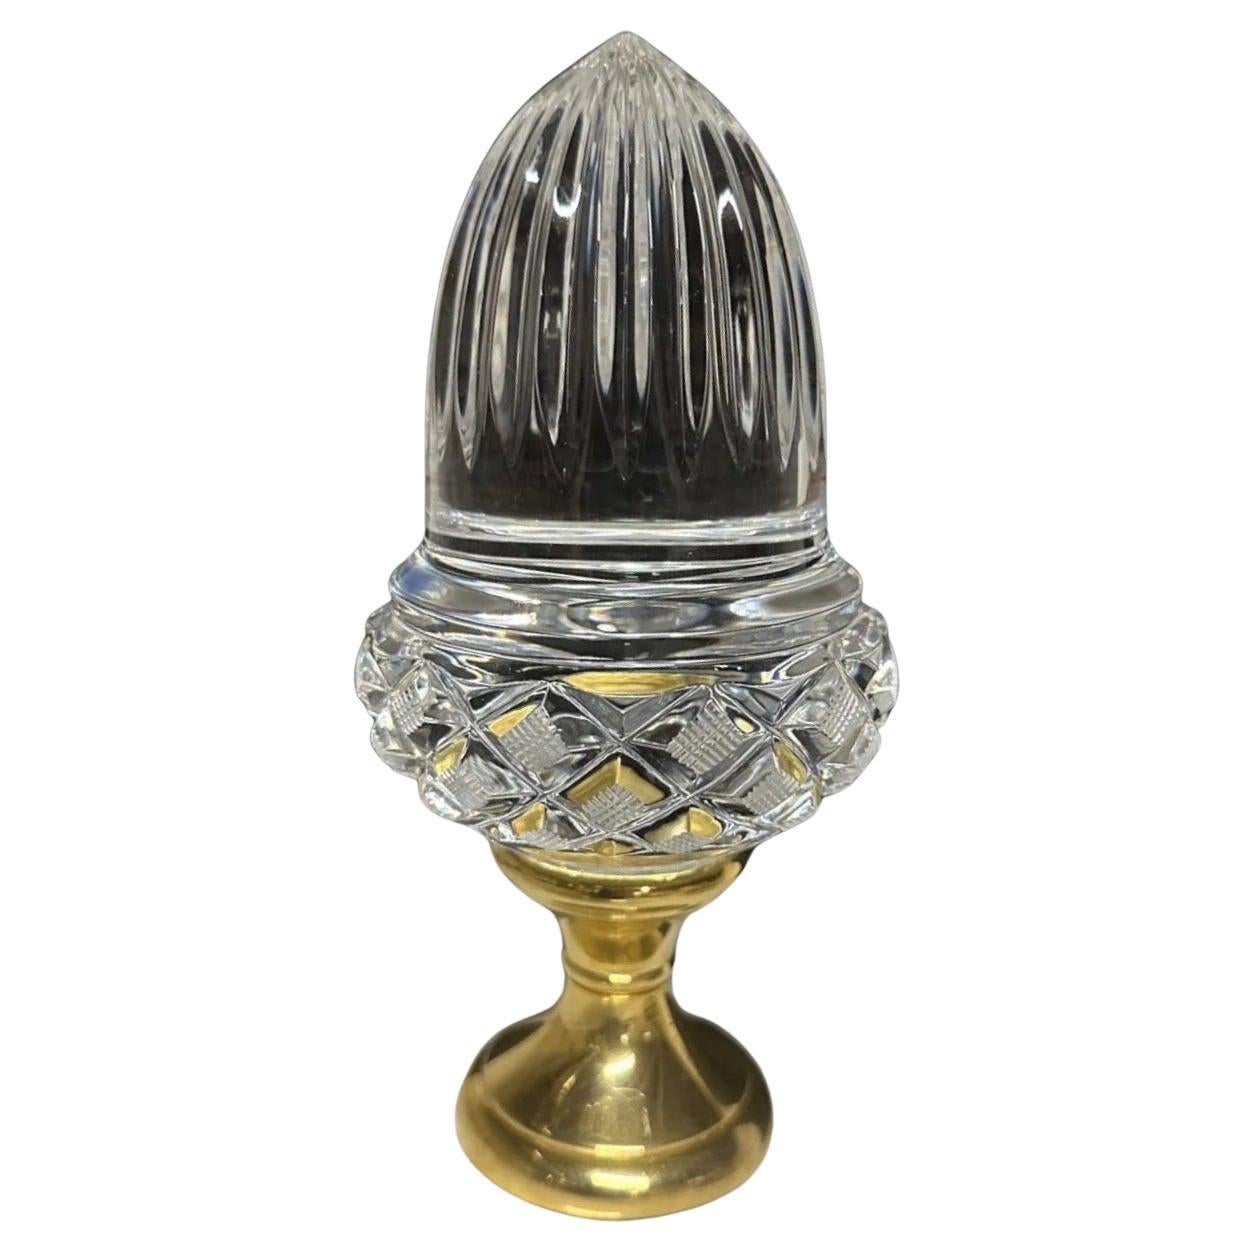 Wonderful Crystal Acorn Cut Faceted Glass Brass Banister Newel Post Finial